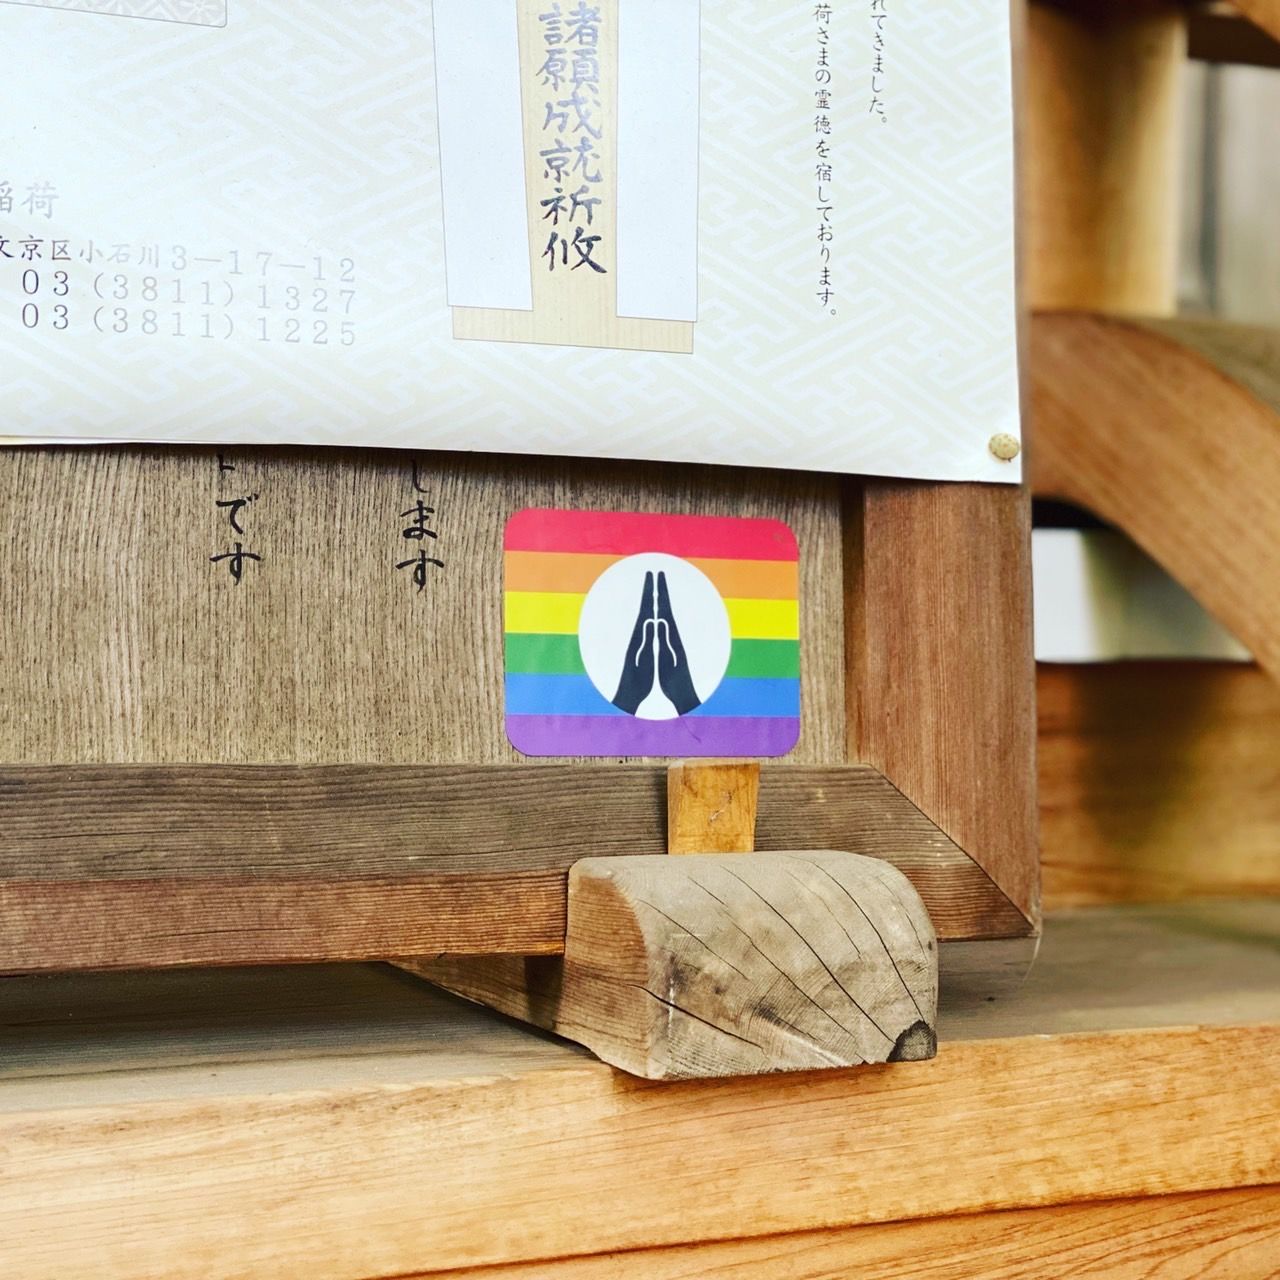 One of Nishimura’s stickers on display at the visitor’s window at a Buddhist temple. (Courtesy of Nishimura Kōdō)